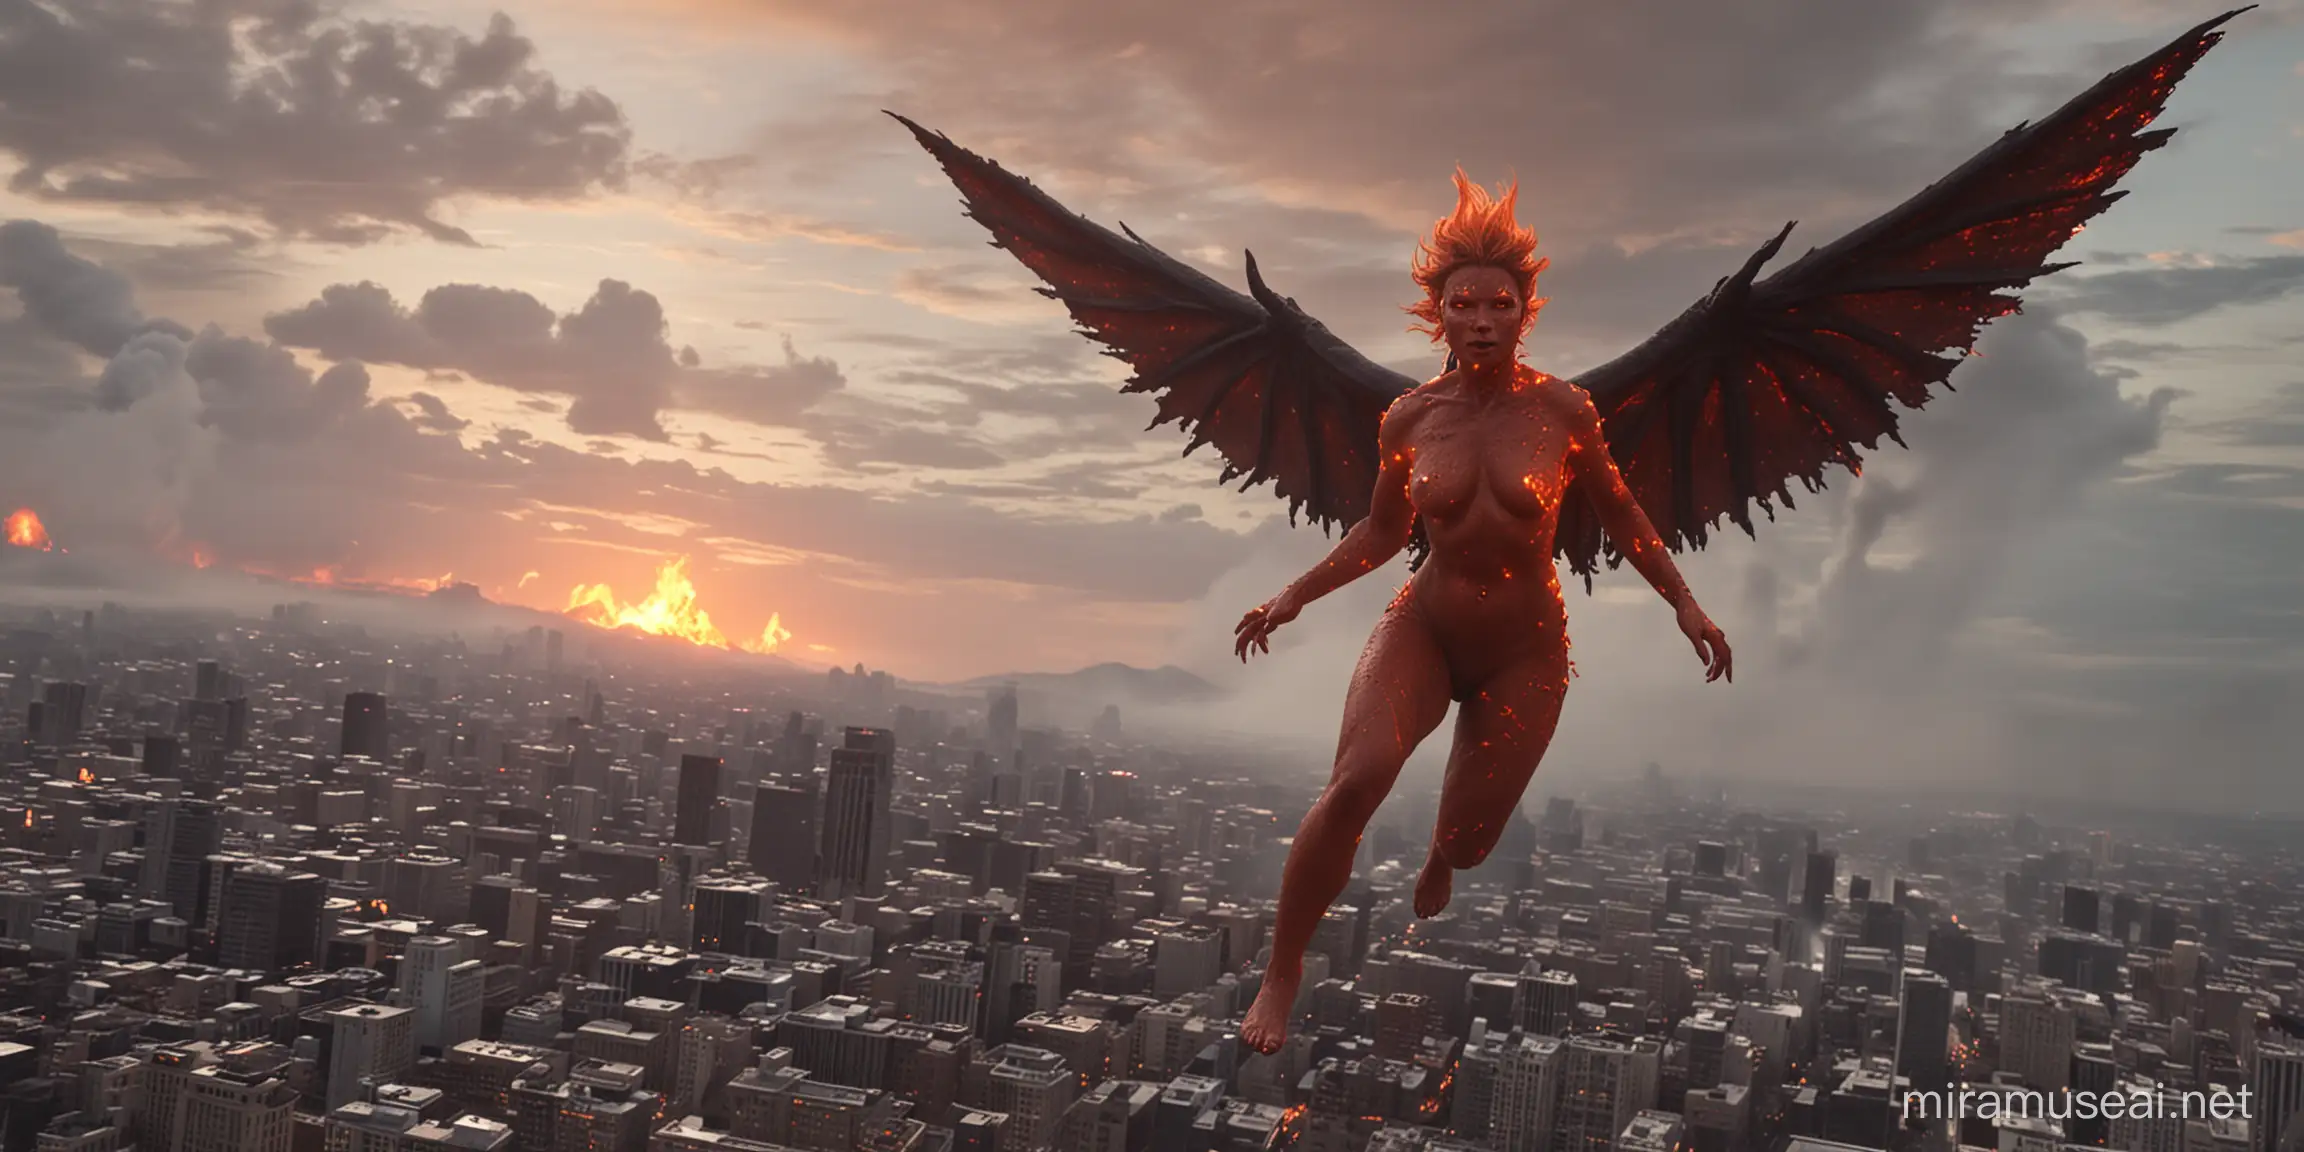 Nude Female Lava creature flying over the city